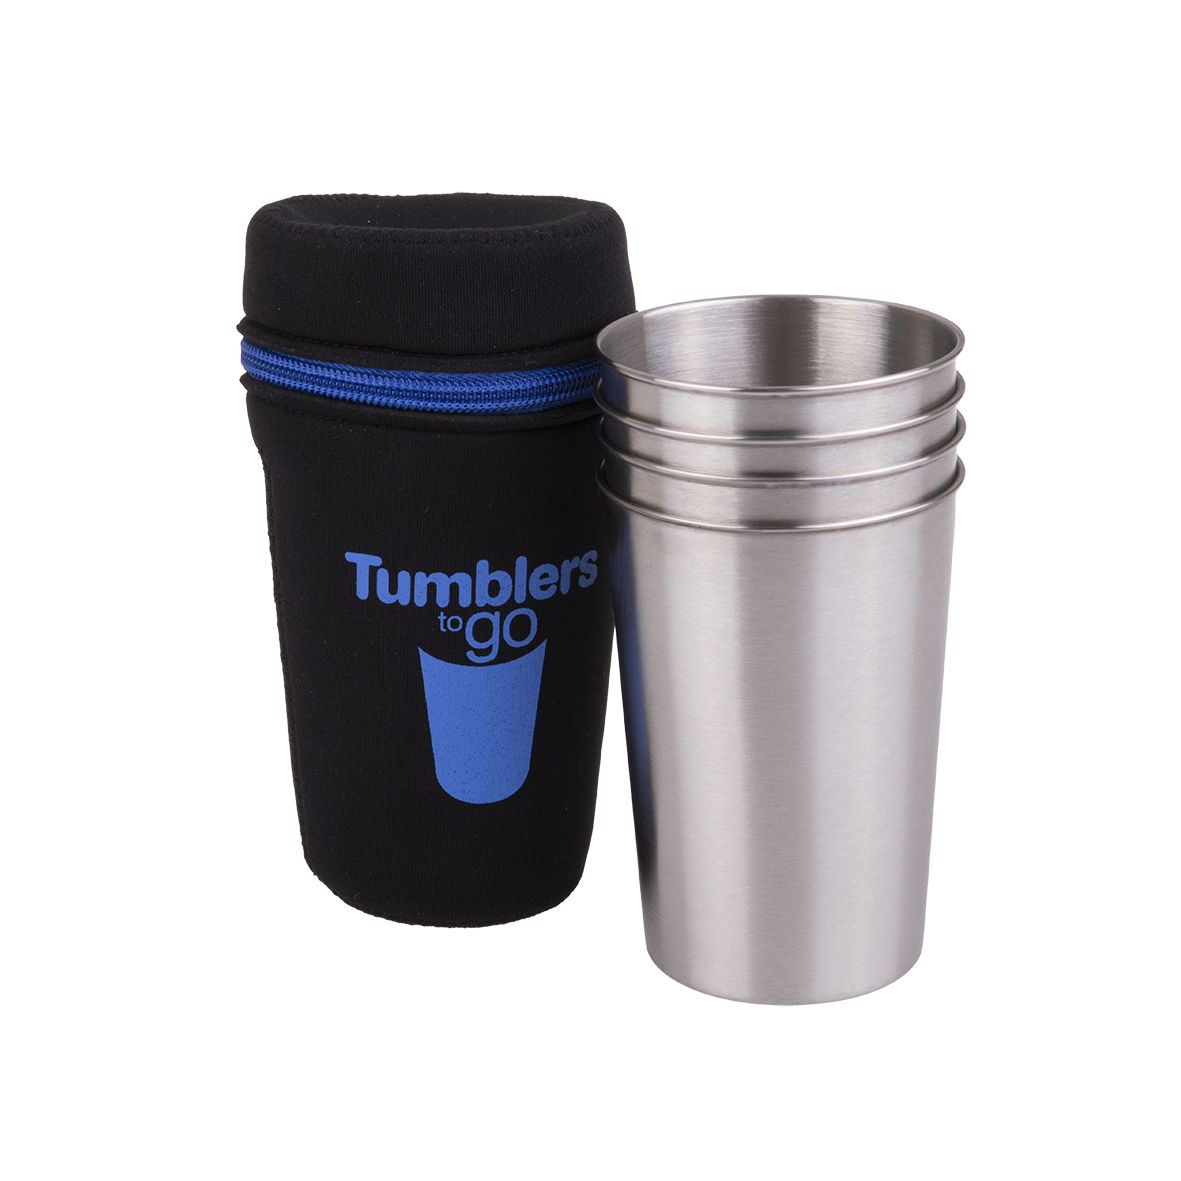 Go Stainless Steel Tumblers To Go 350ml Set 4 W Case